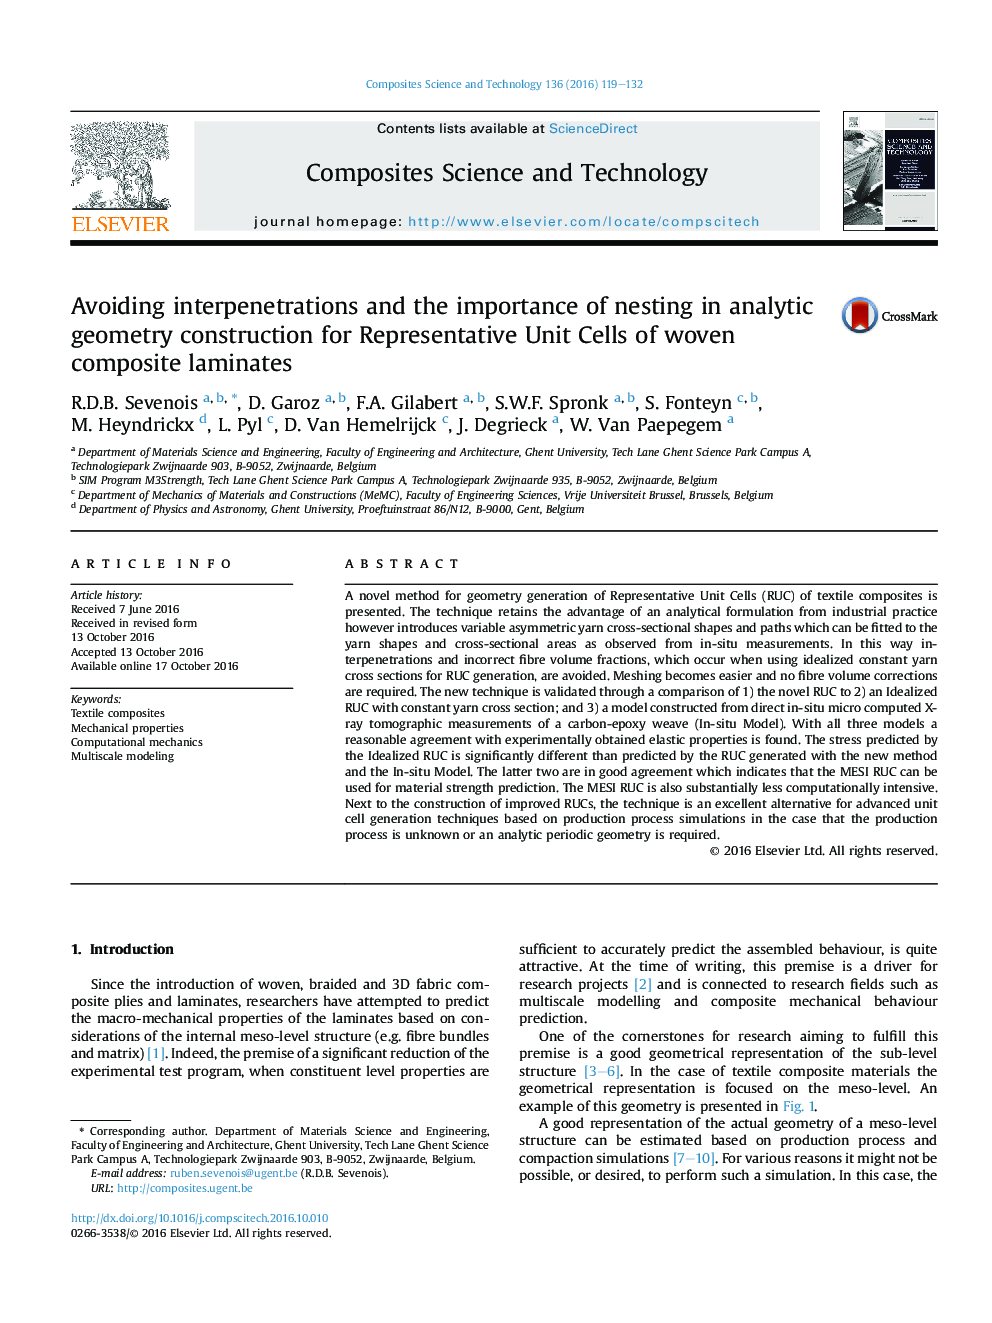 Avoiding interpenetrations and the importance of nesting in analytic geometry construction for Representative Unit Cells of woven composite laminates